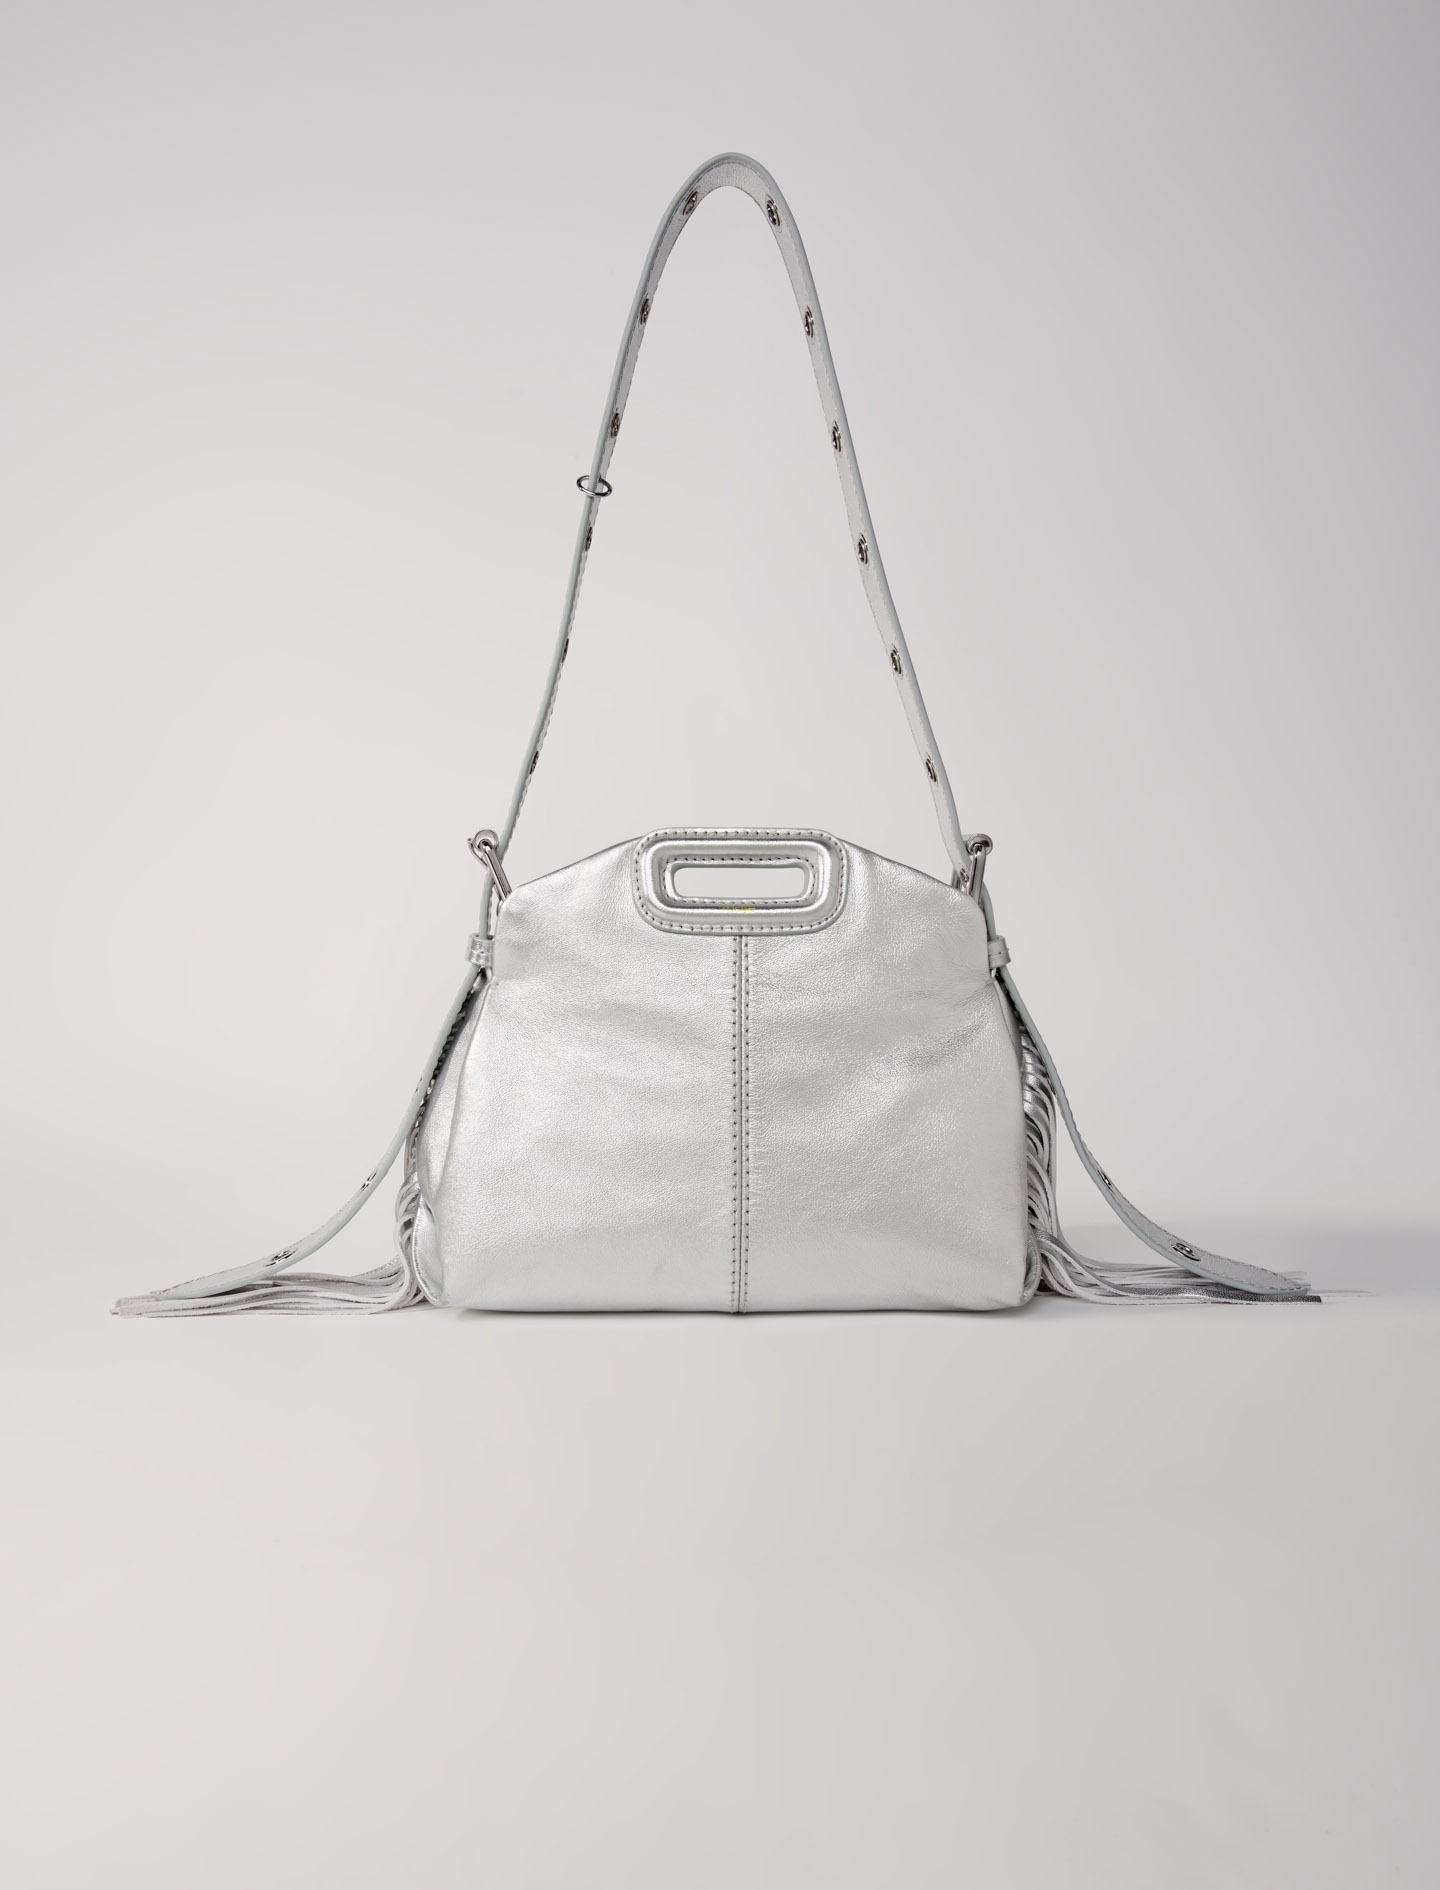 Mixte's polyester Leather: Metallic leather mini Miss M bag for Spring/Summer, size Mixte-All Bags-OS (ONE SIZE), in color Silver / Grey